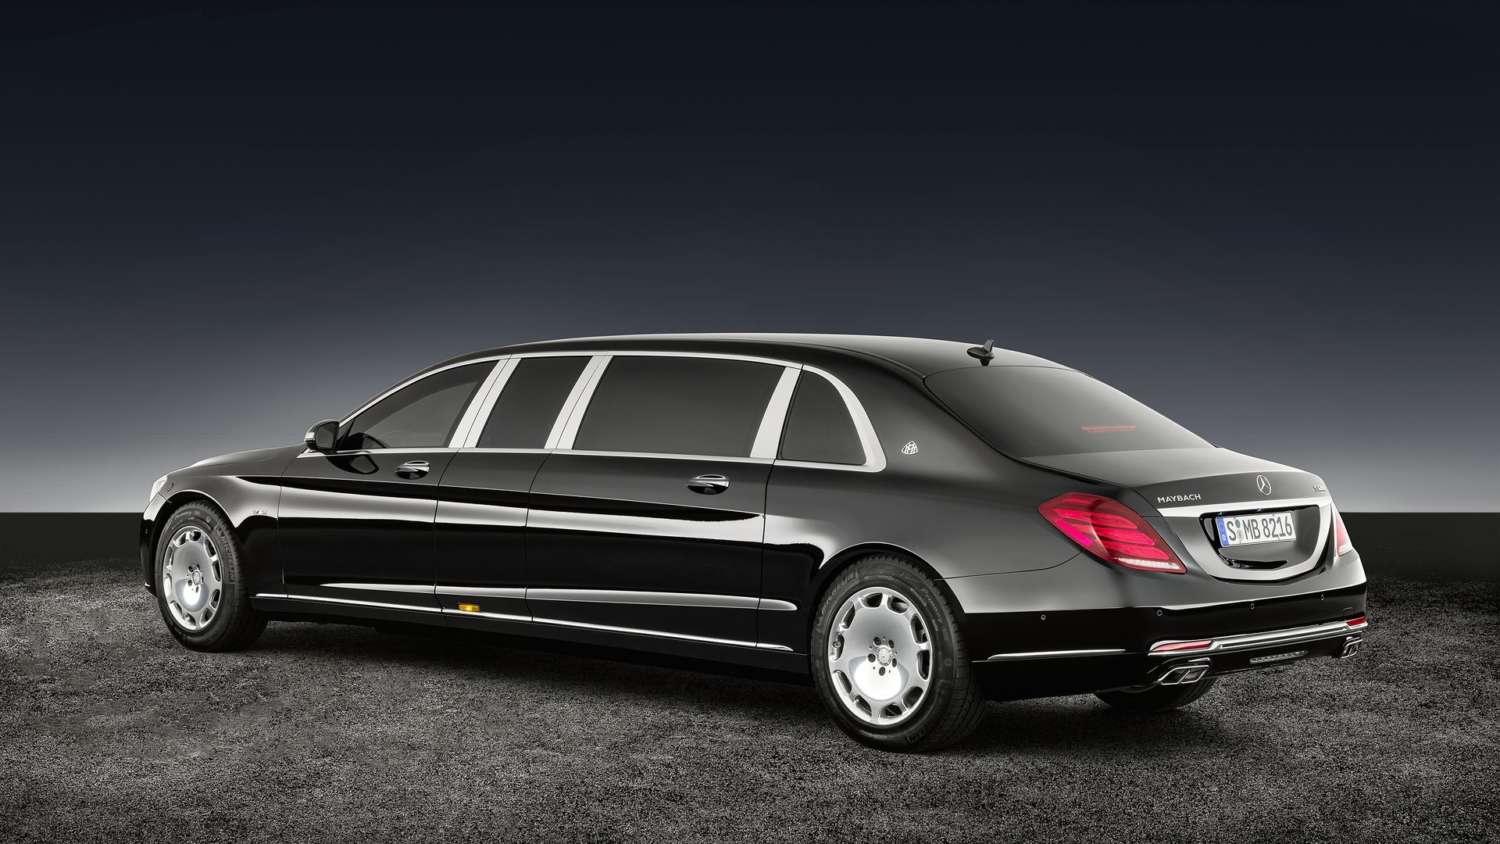 This Is The 17 Mercedes Maybach S600 Pullman Guard A Inr 7 5 Crore Castle On Wheels For The Supreme